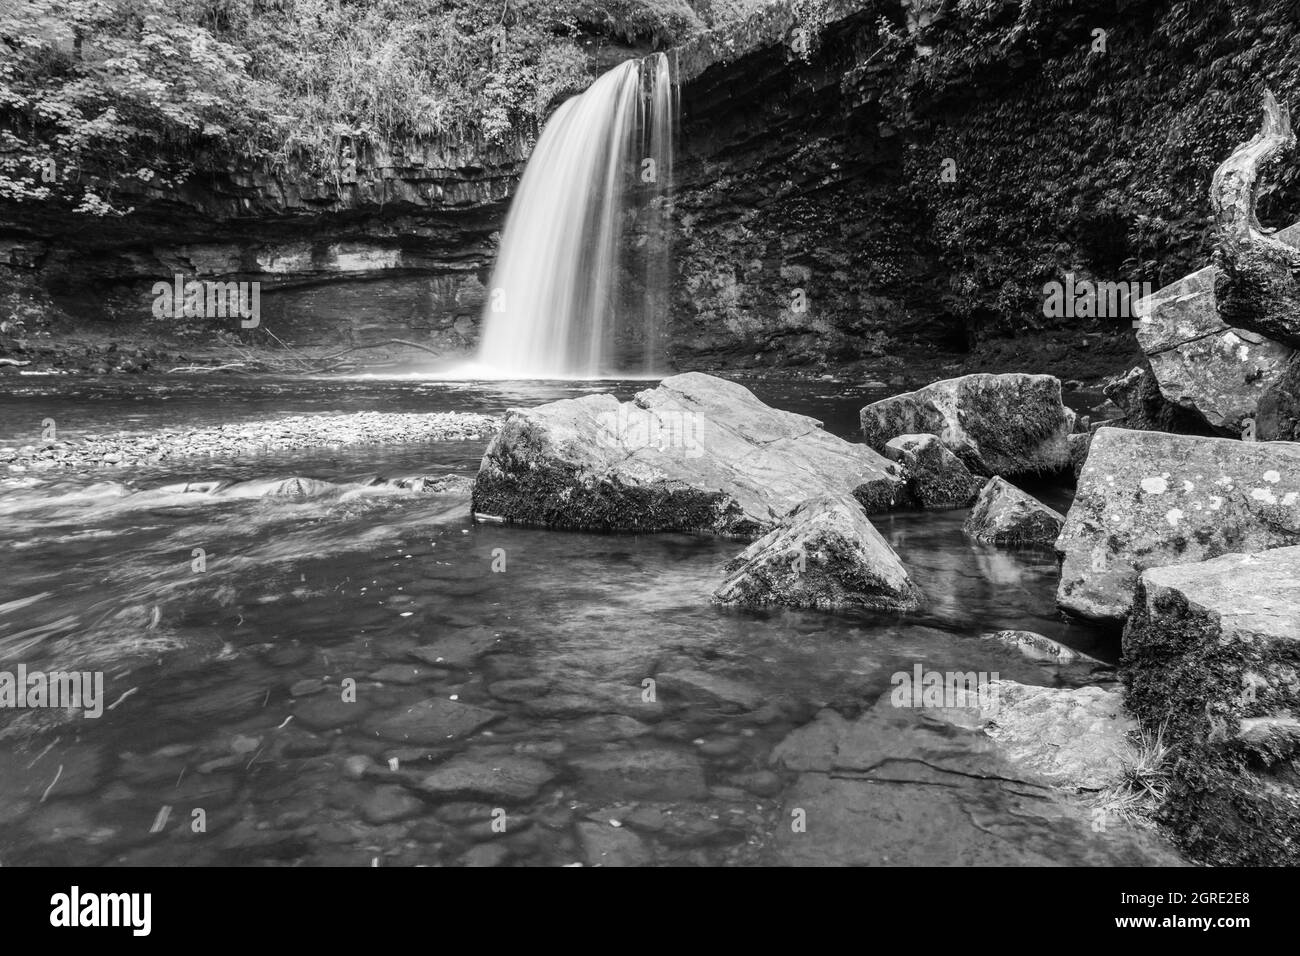 Lady Falls/Sgwd Gwladys on the Nedd Fechan river in the Brecon Beacons National Park Brecknockshire Wales UK Stock Photo